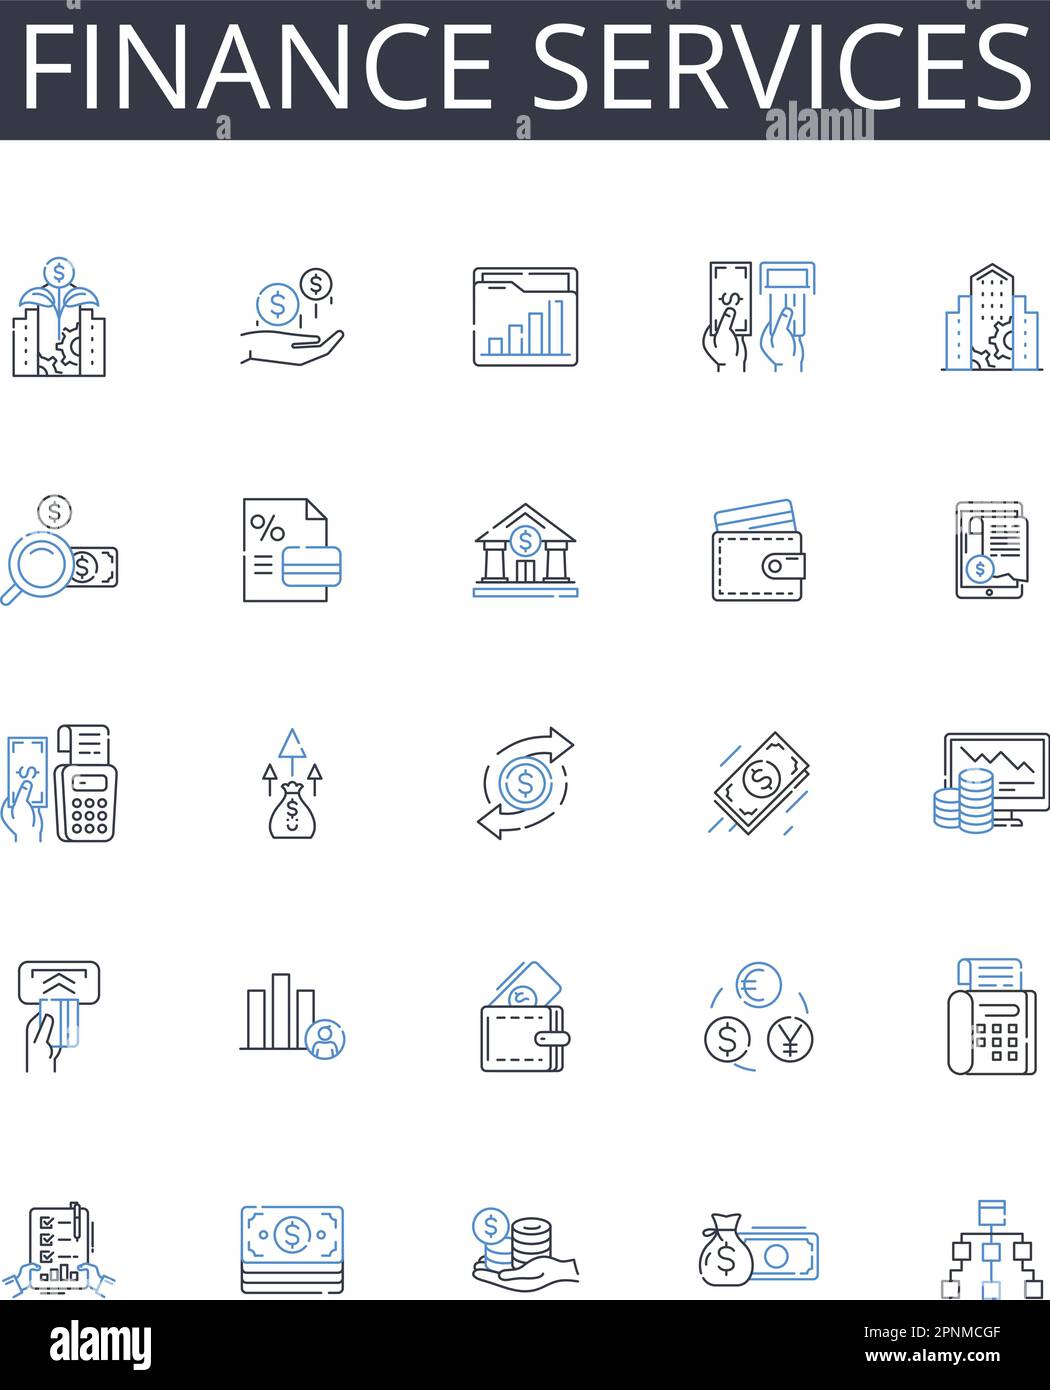 Finance services line icons collection. Banking, Investment, Accounting, Wealth management, Asset management, Financial planning, Insurance vector and Stock Vector